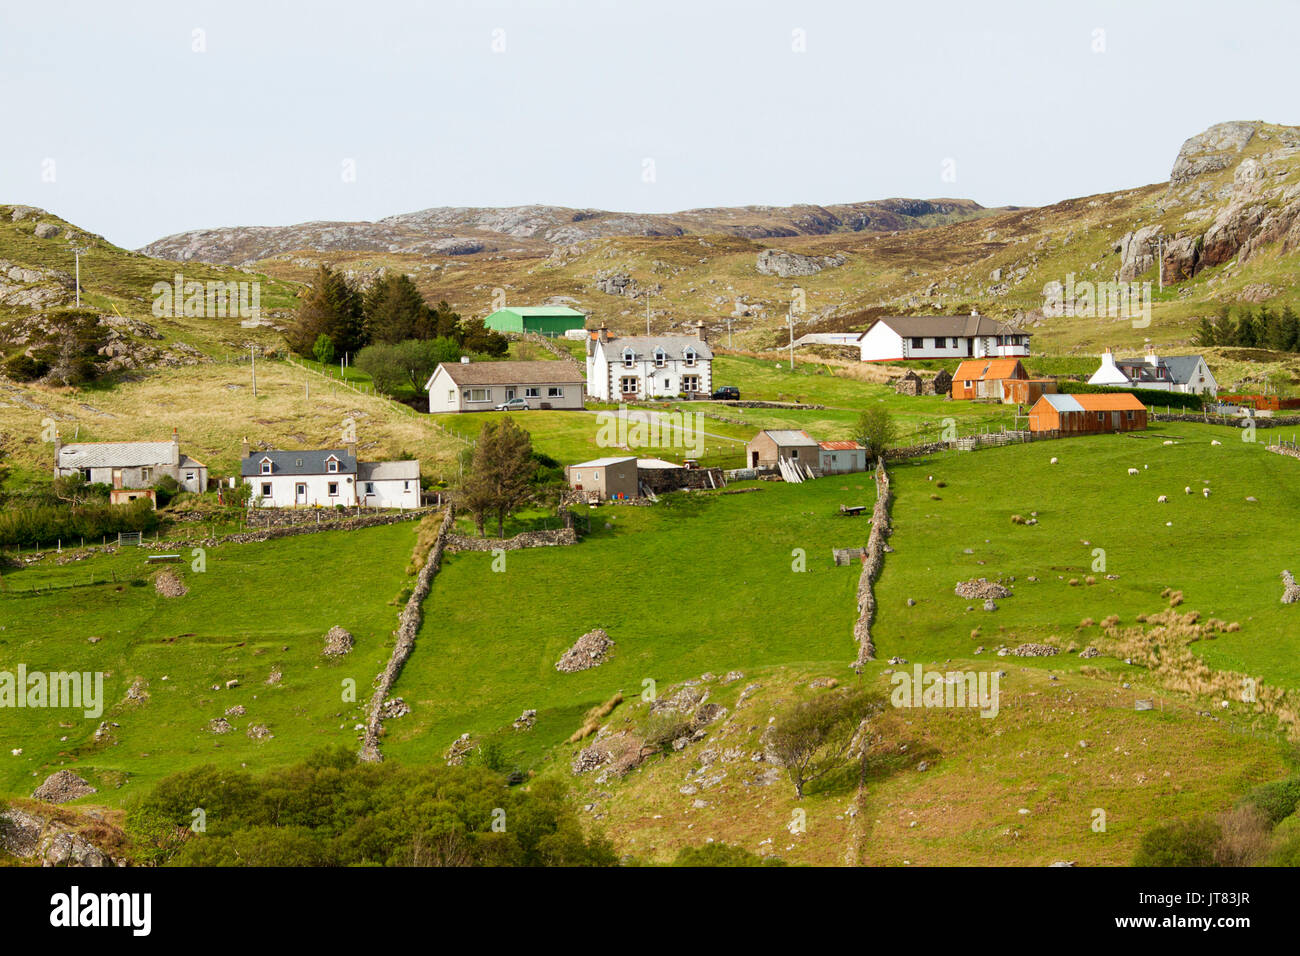 Crofters cottages and farmlands with green fields at base of rocky hills in Scottish highlands near Kinlochbervie, Scotland Stock Photo